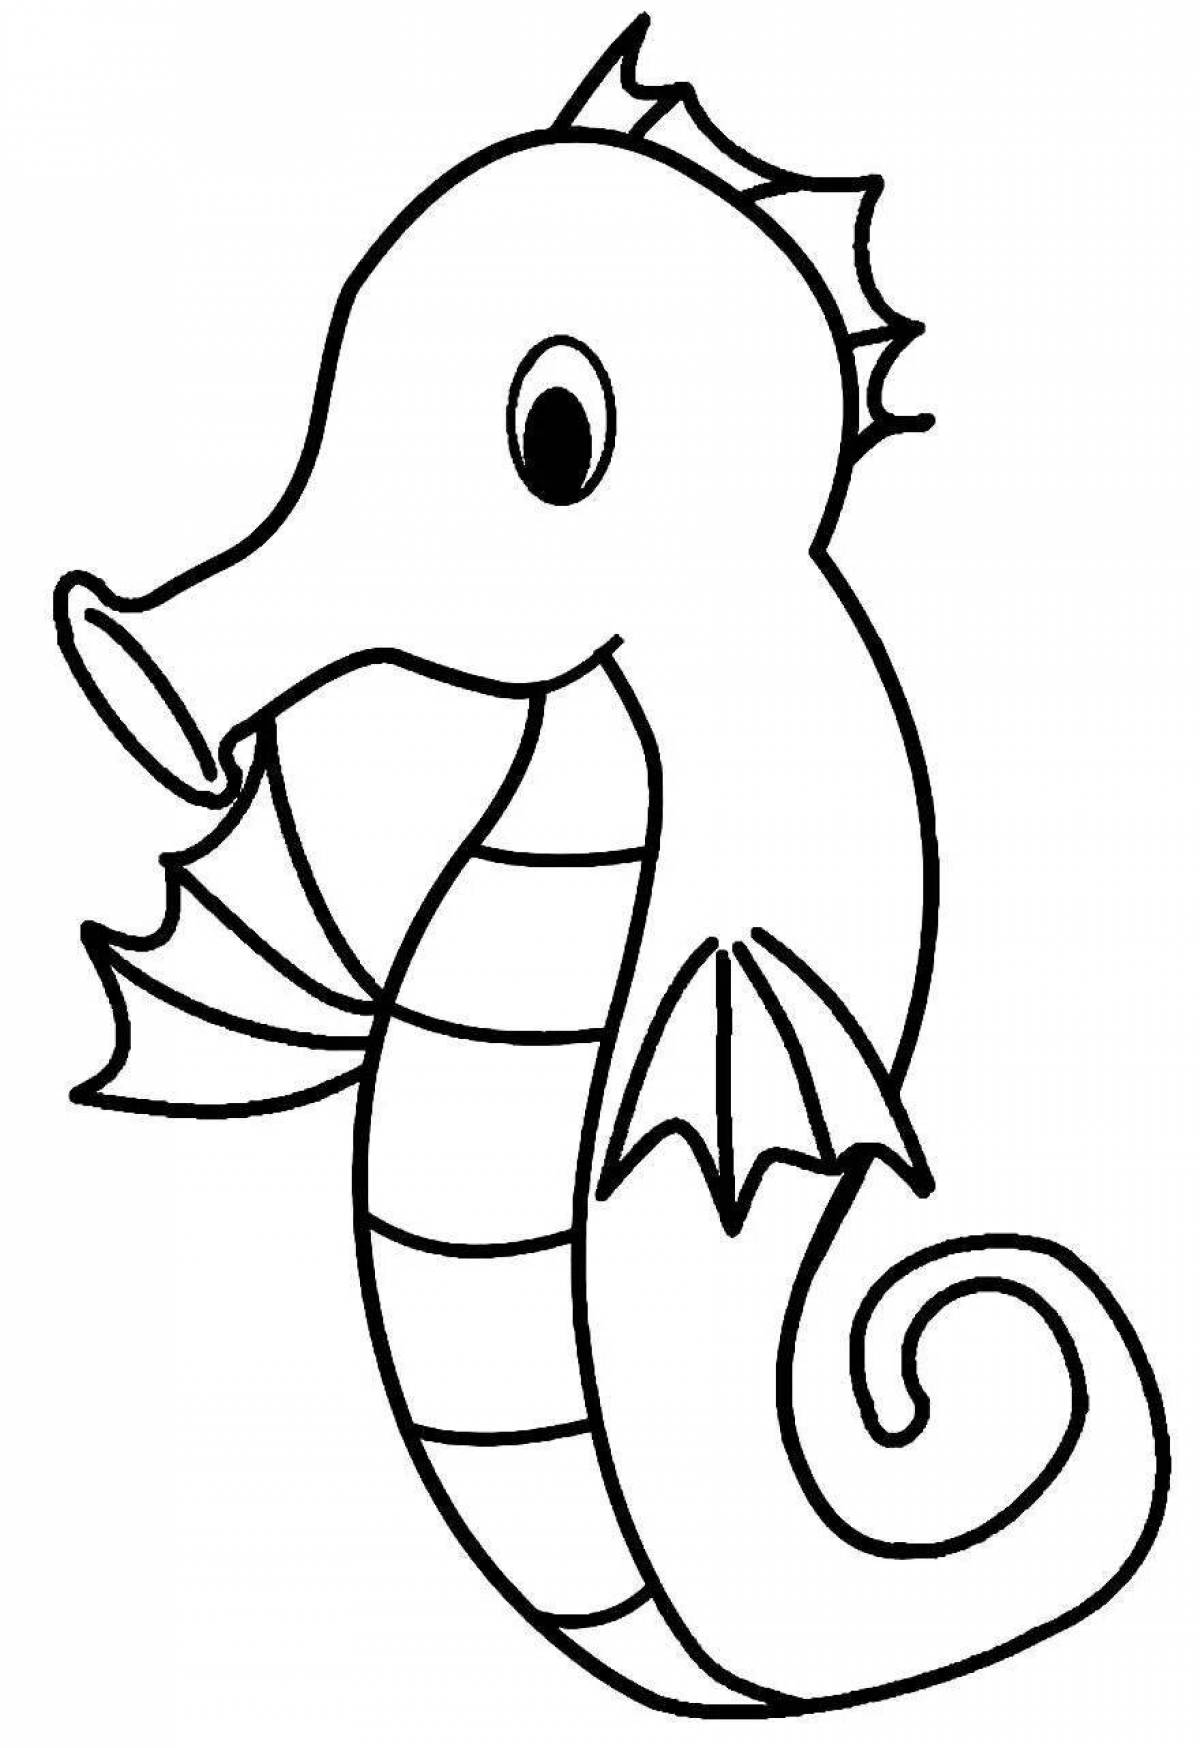 Shiny seahorse coloring book for kids